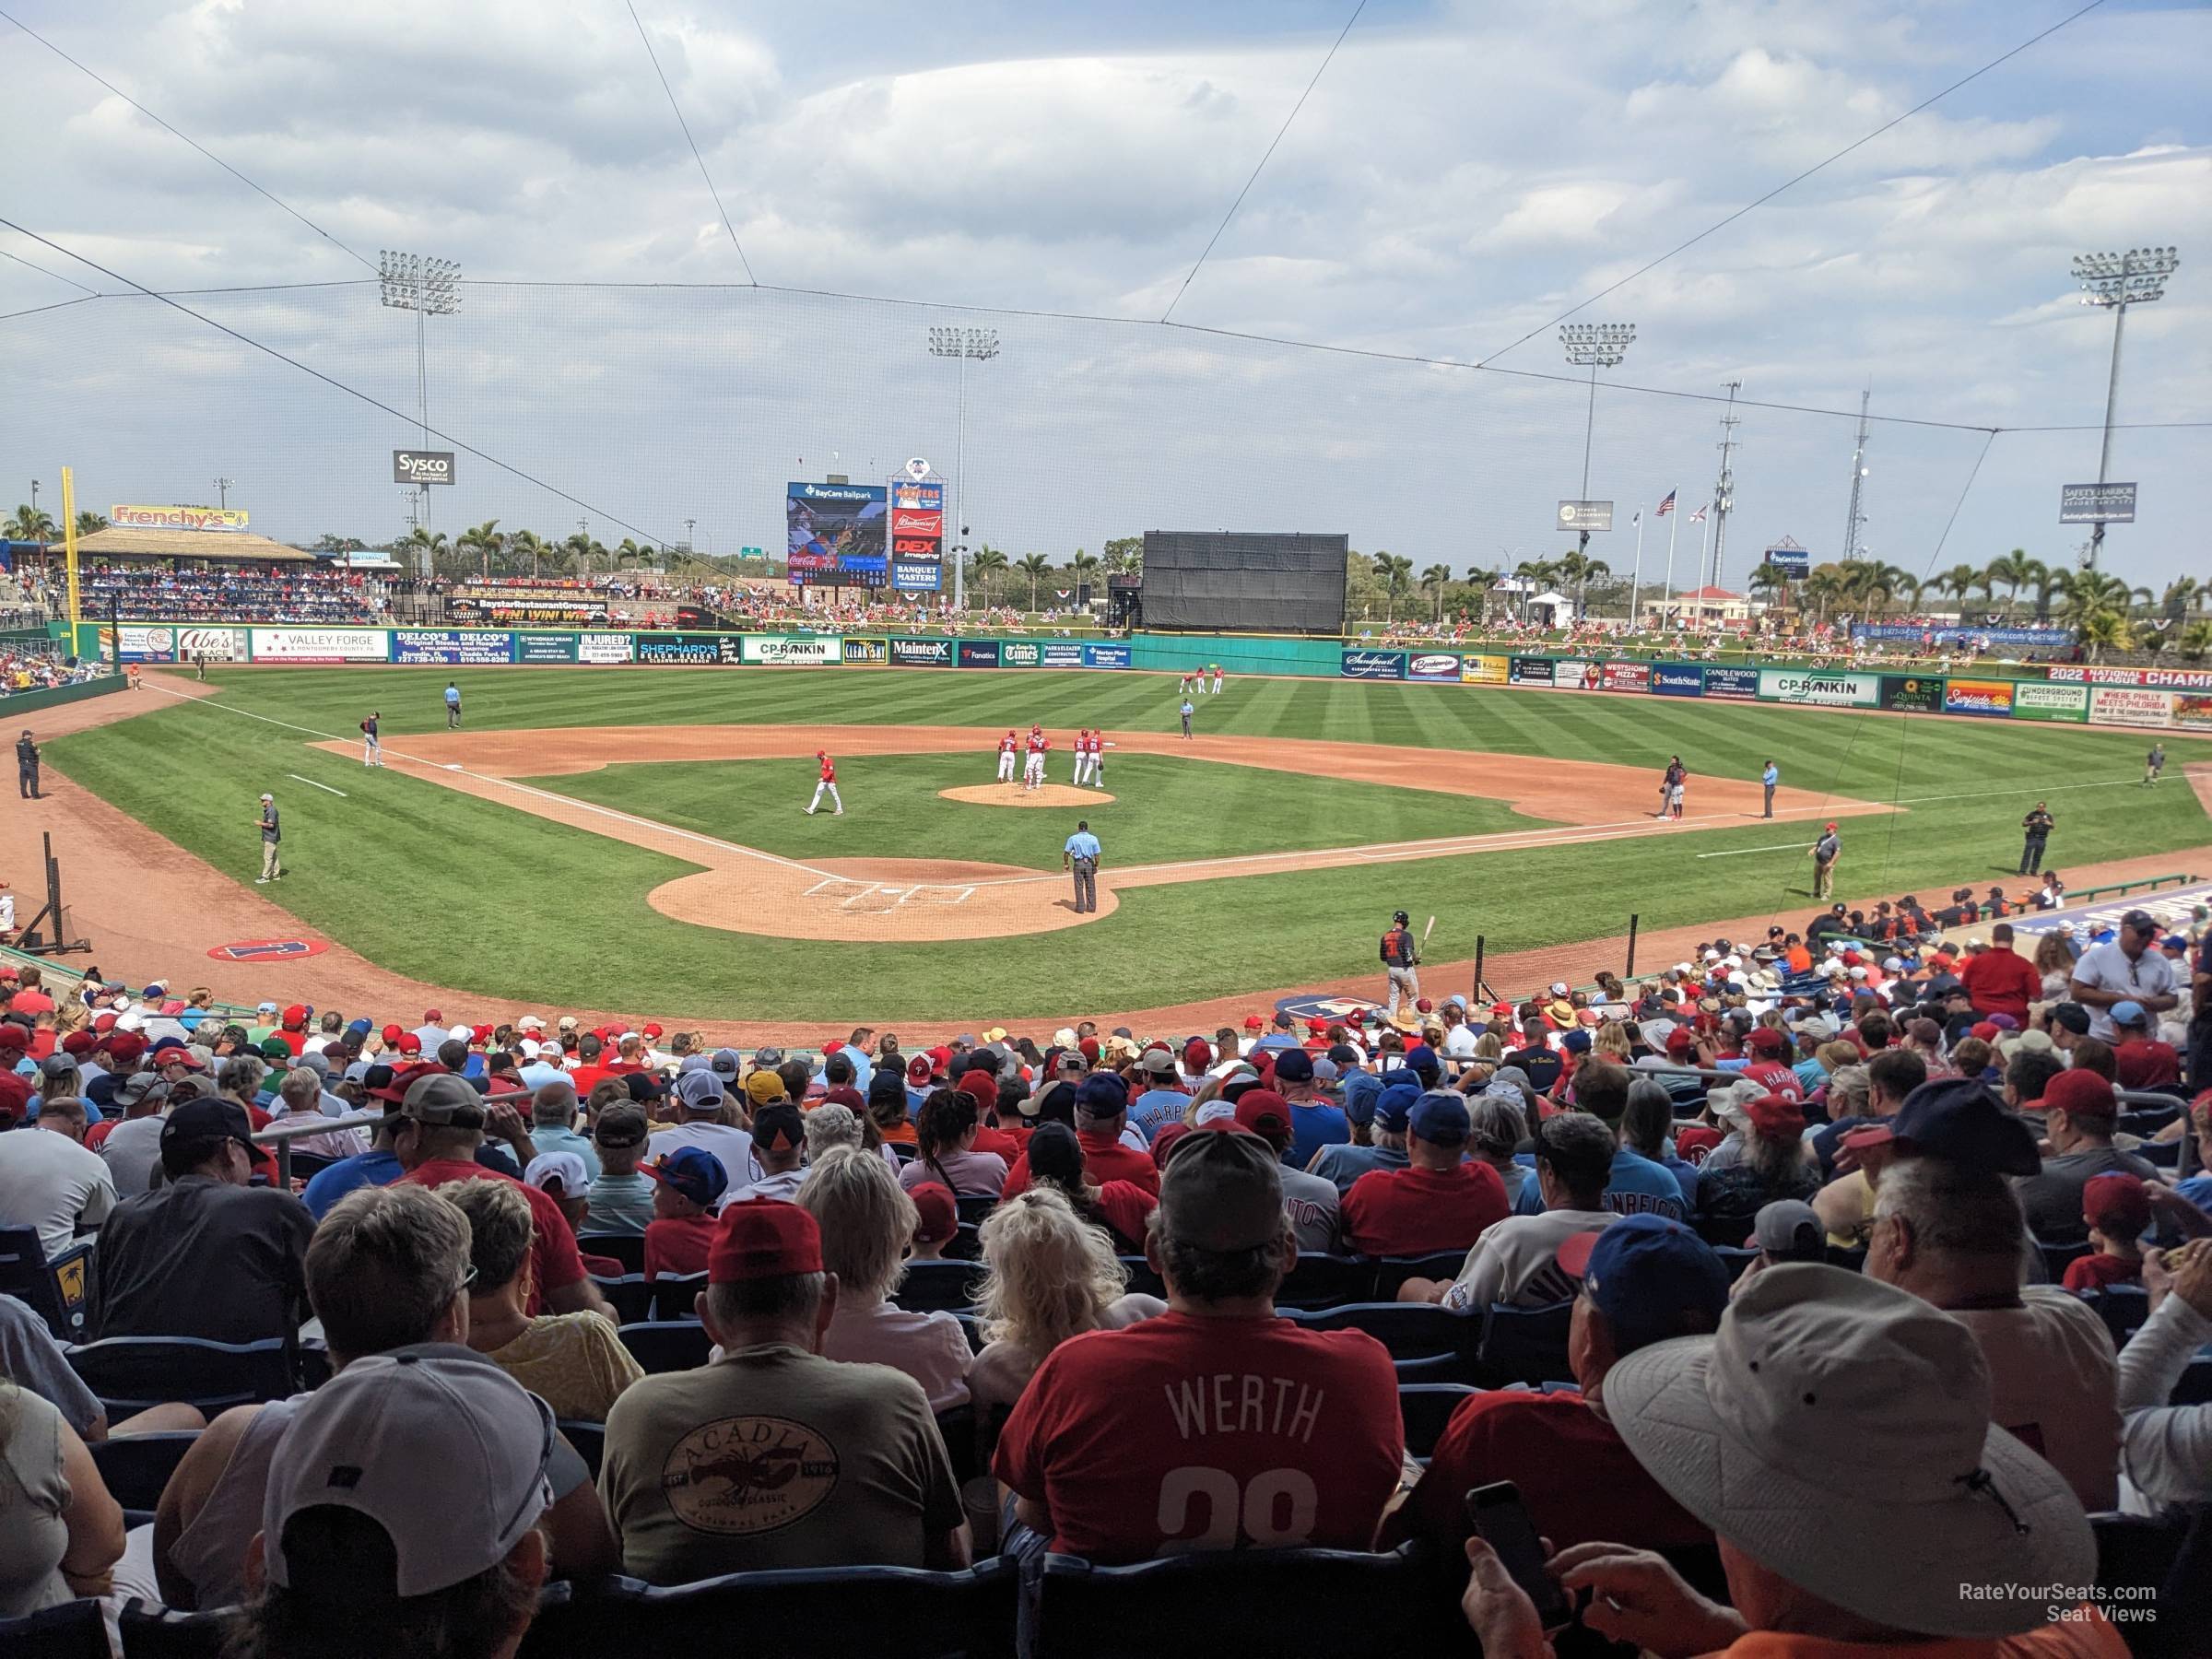 section 110, row 18 seat view  - baycare ballpark